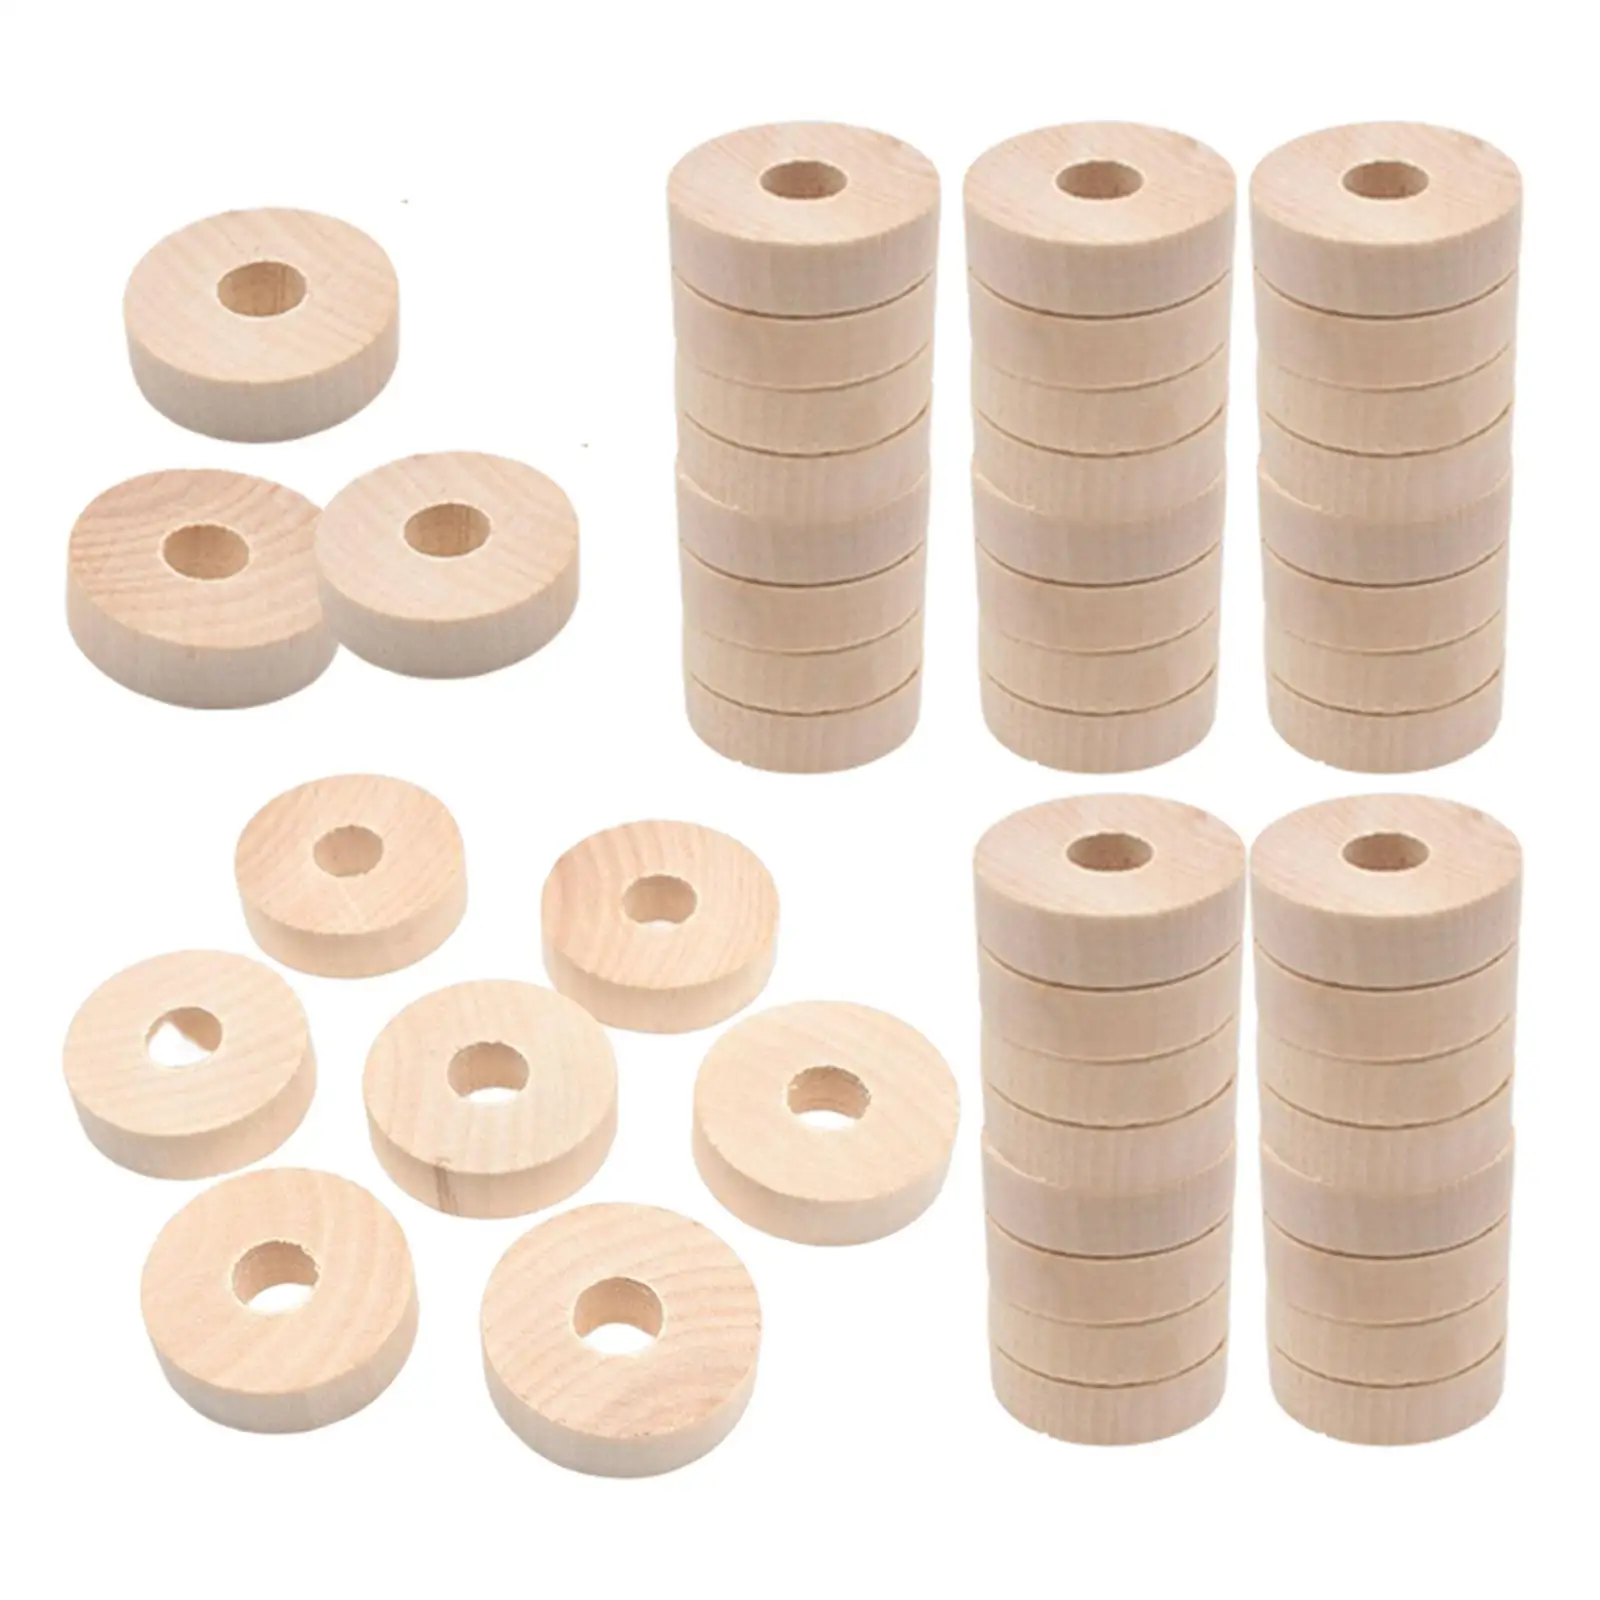 50x Wooden Wheels for Toy Cars Project Home Decor Painting Writing Kids Gift